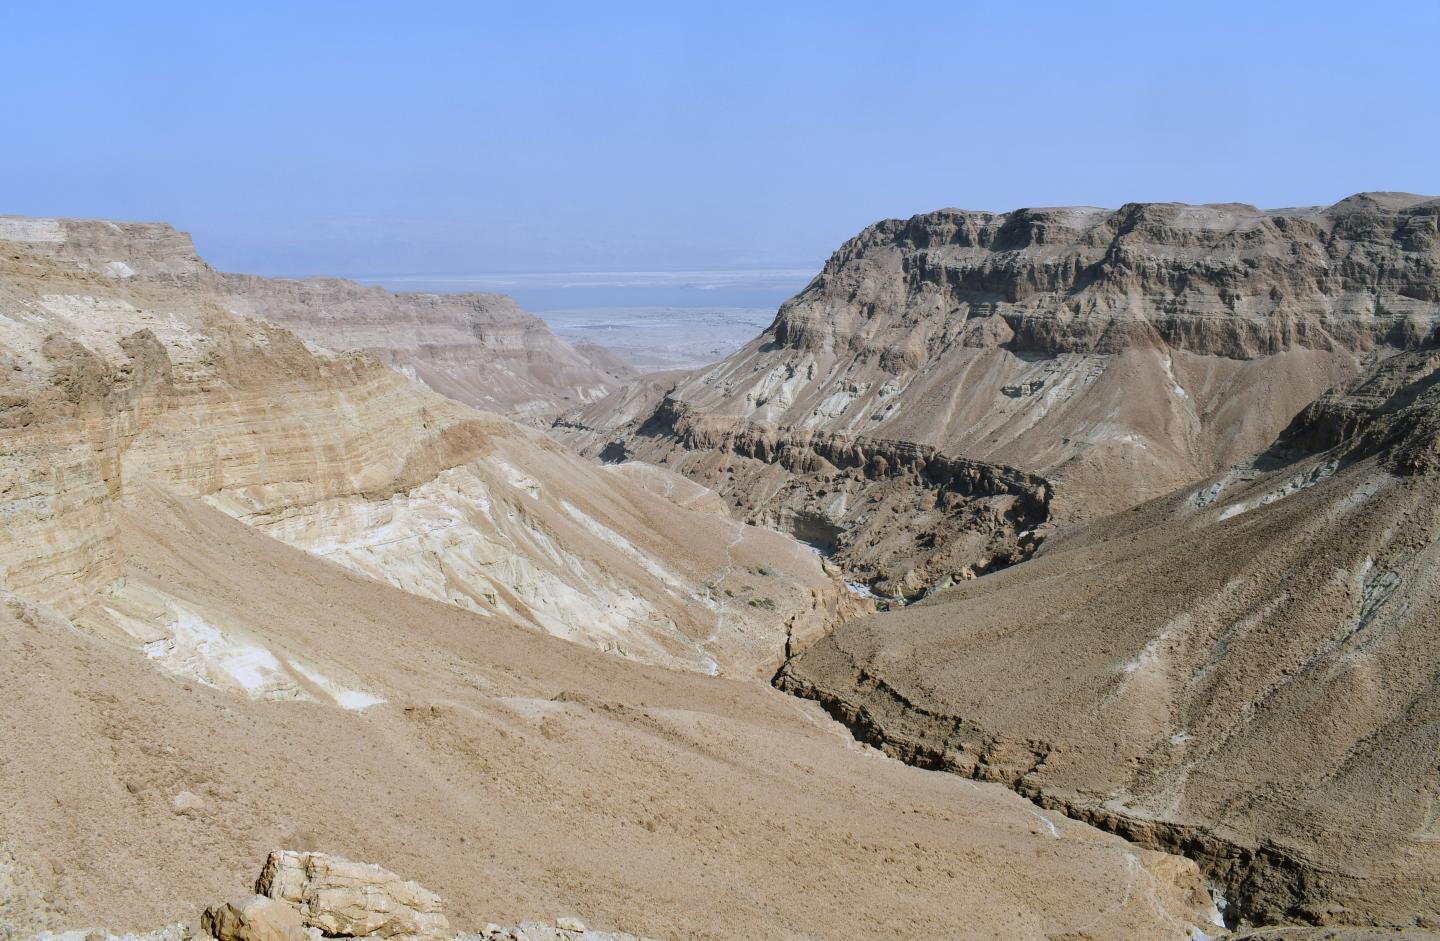 View of the Dead Sea and the southern Judean Desert